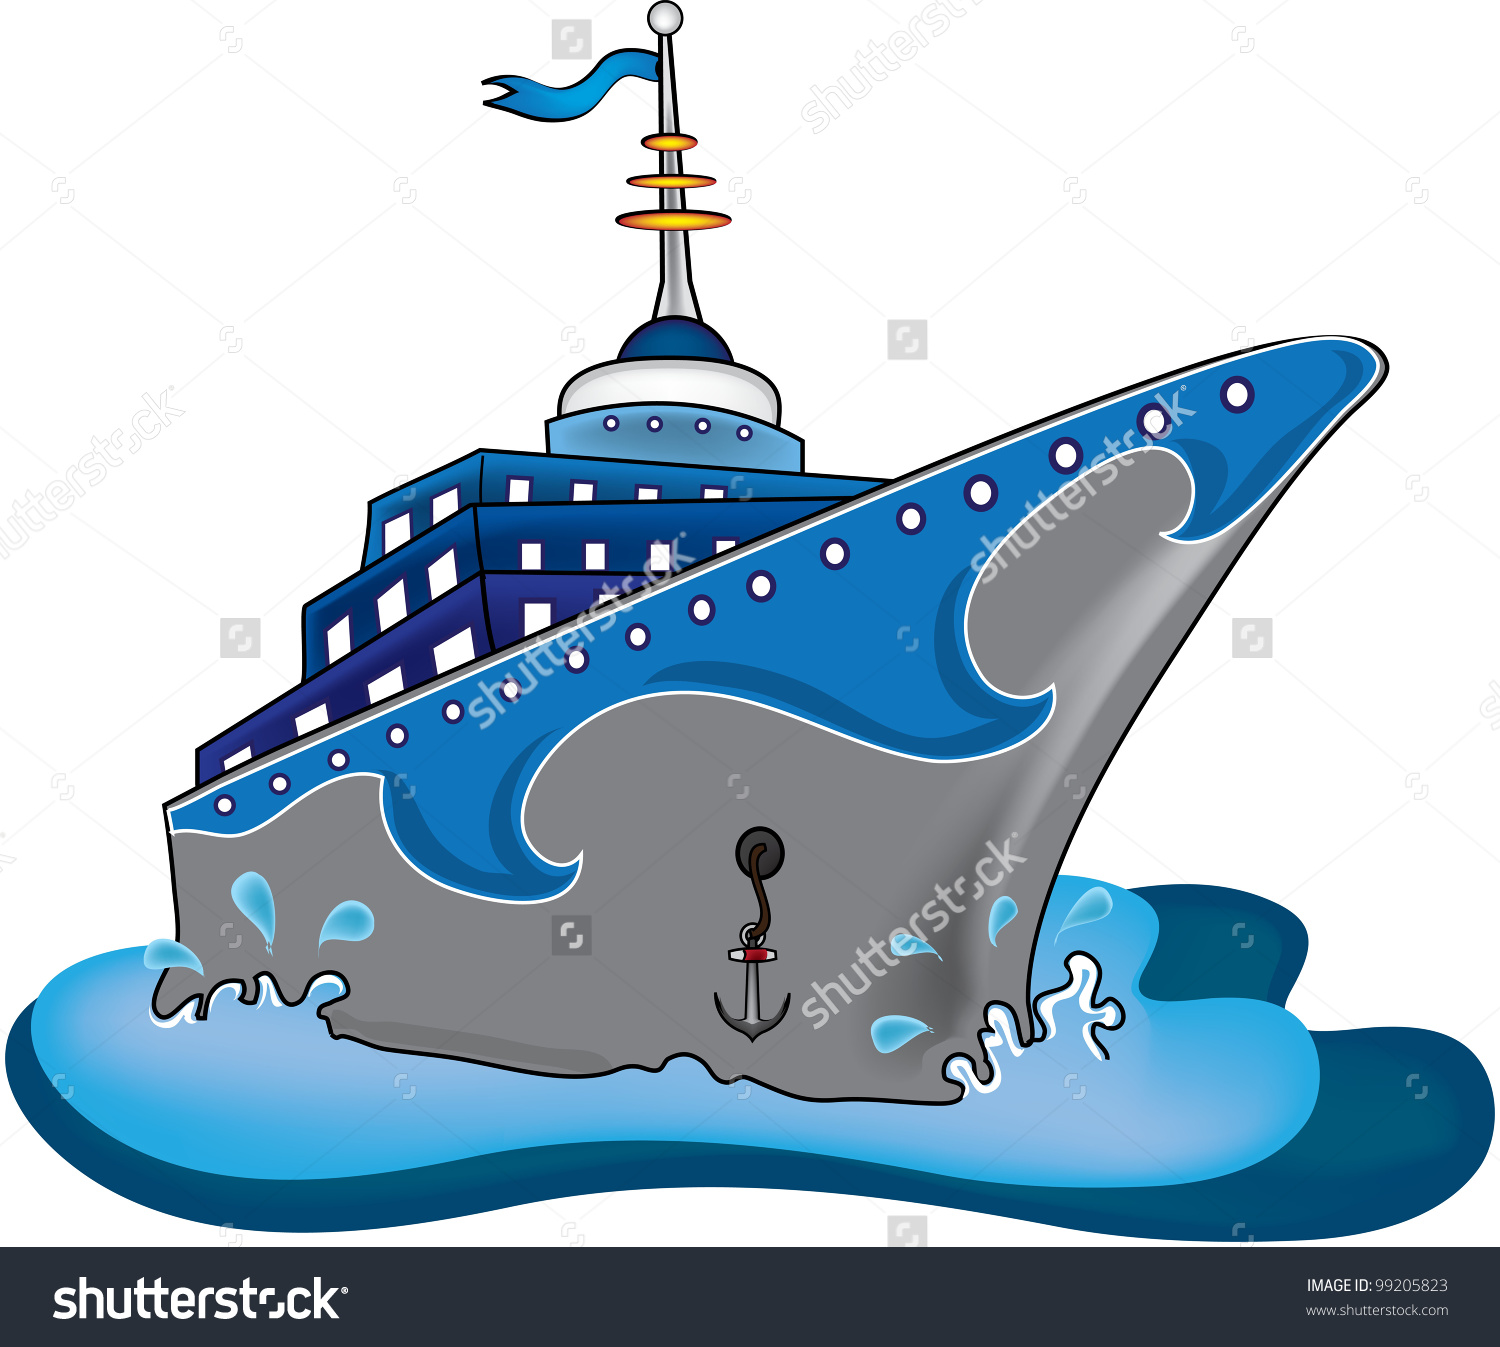 clipart for ship - photo #46